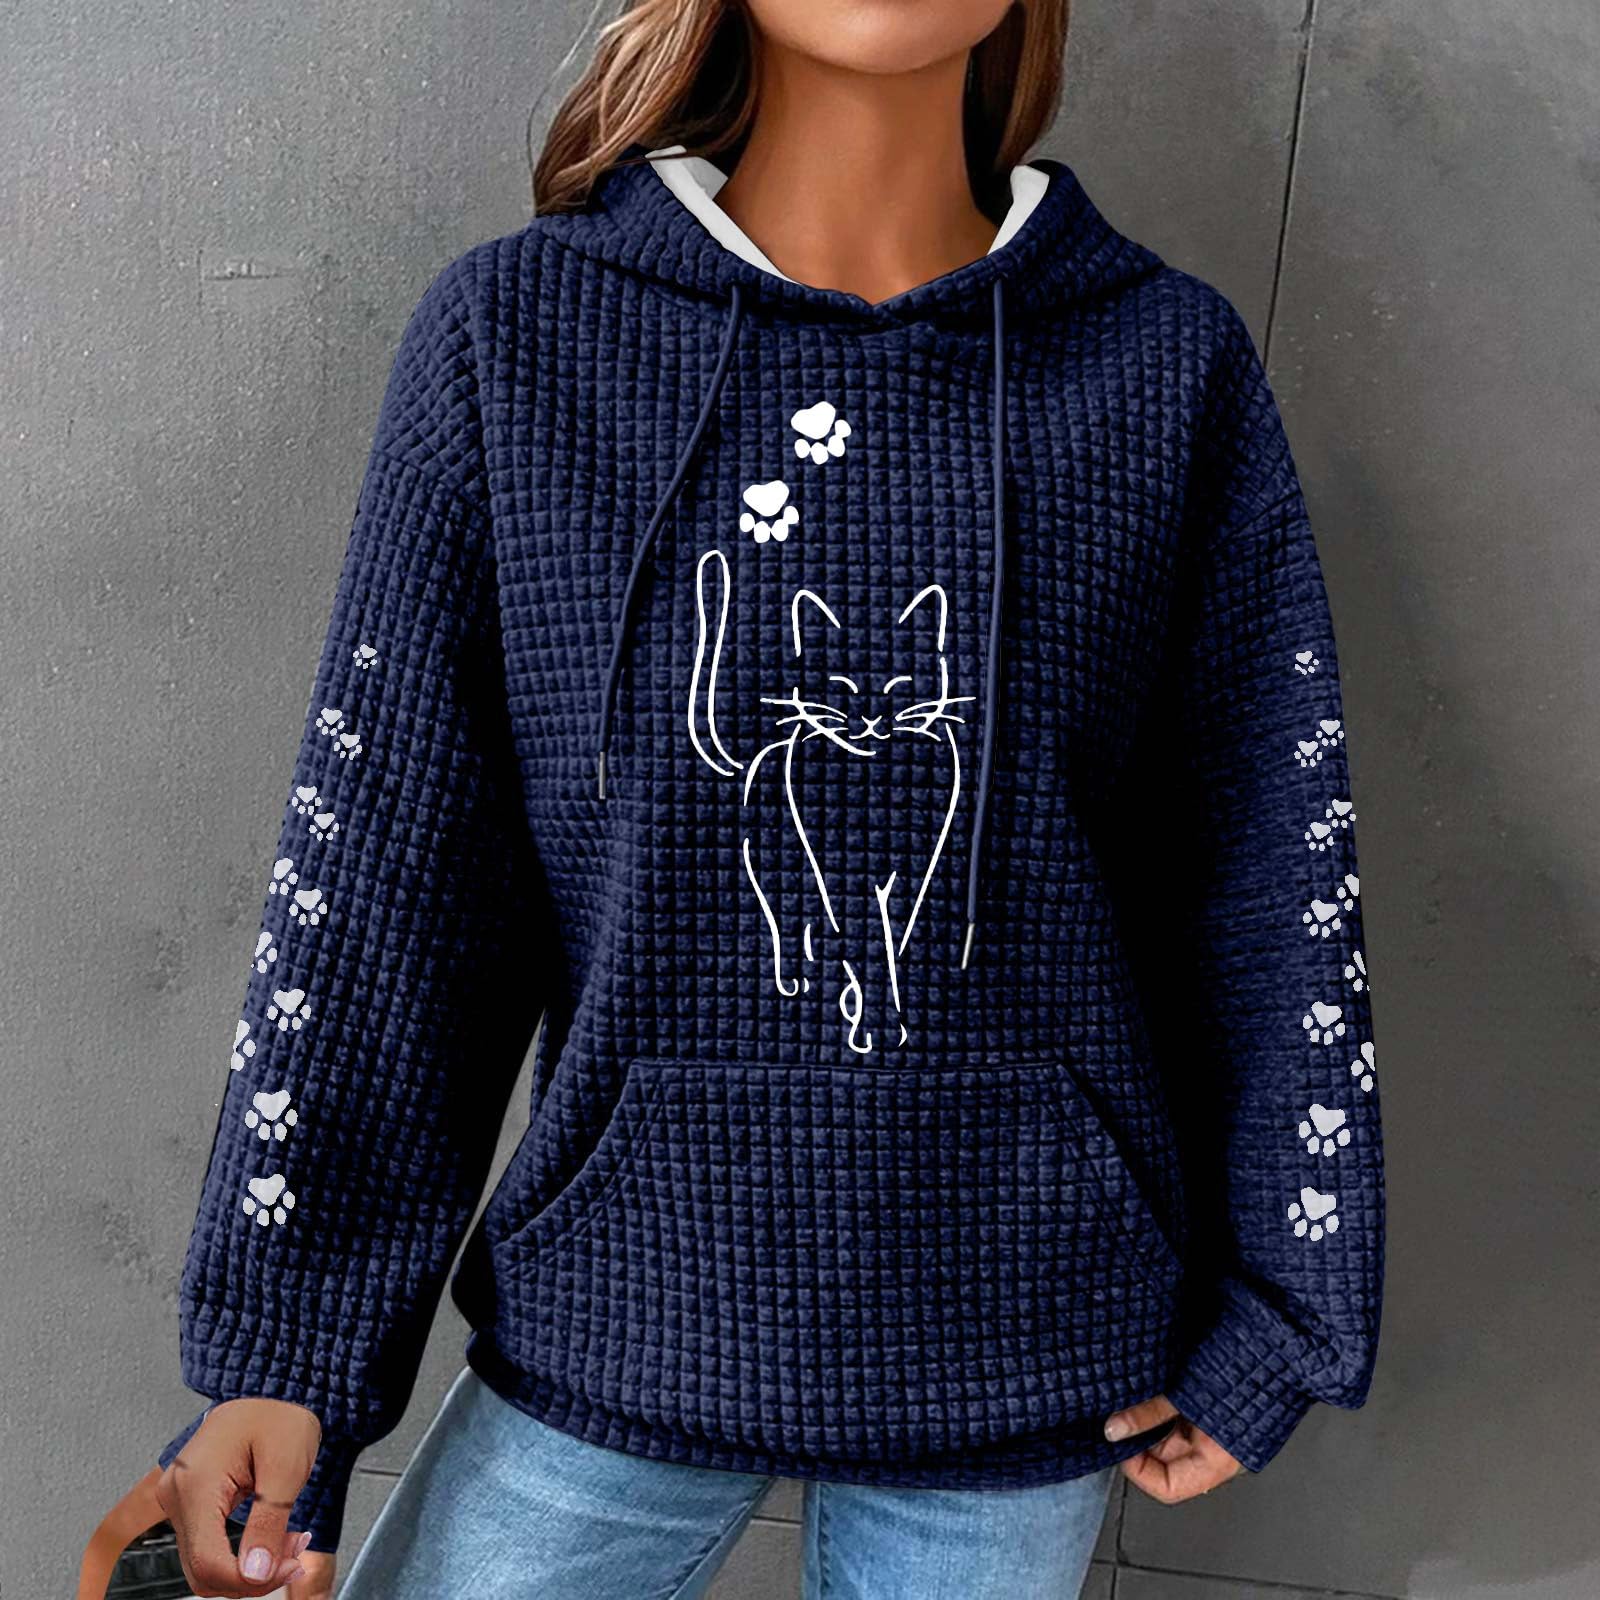 Ausyst Women Waffle Knit Hoodies Cute Cat Printed Drawstring Pullover Sweatshirts Fashion Casual Sweaters Comfy Fall Clothes